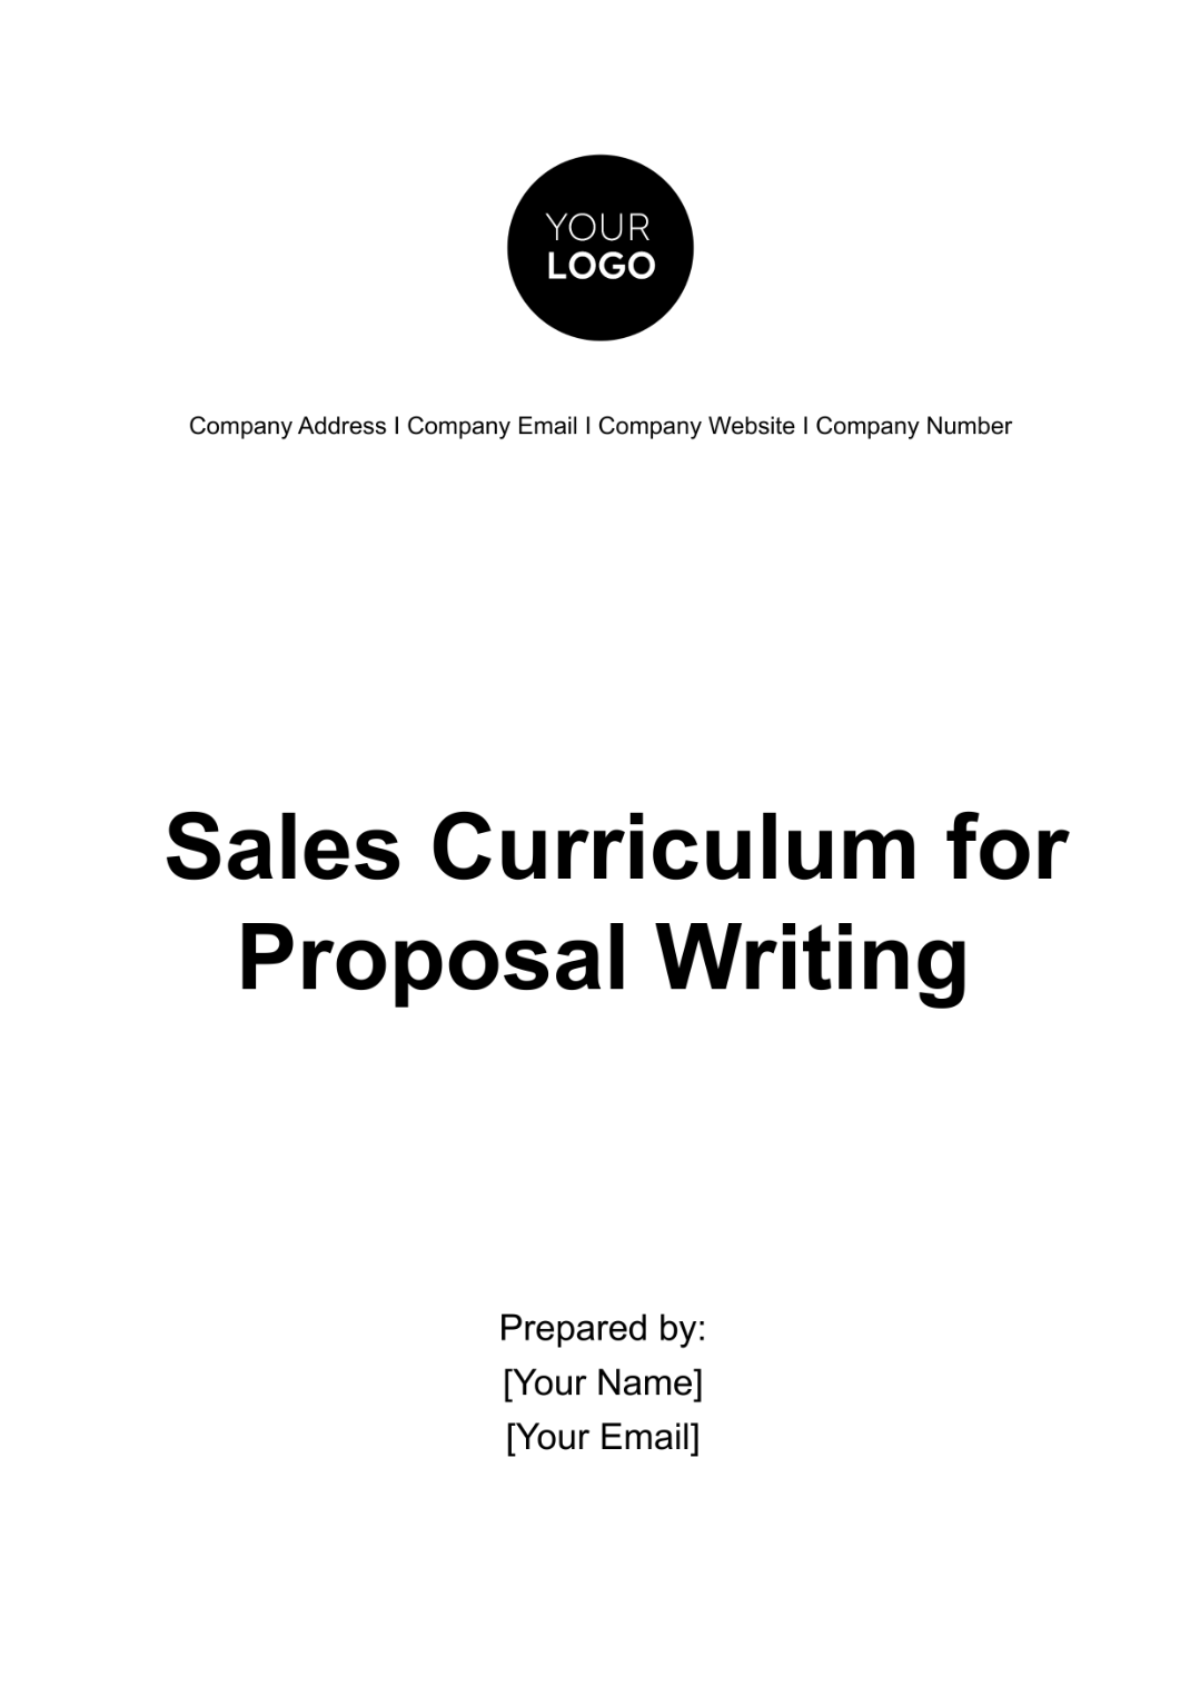 Free Sales Curriculum for Proposal Writing Template